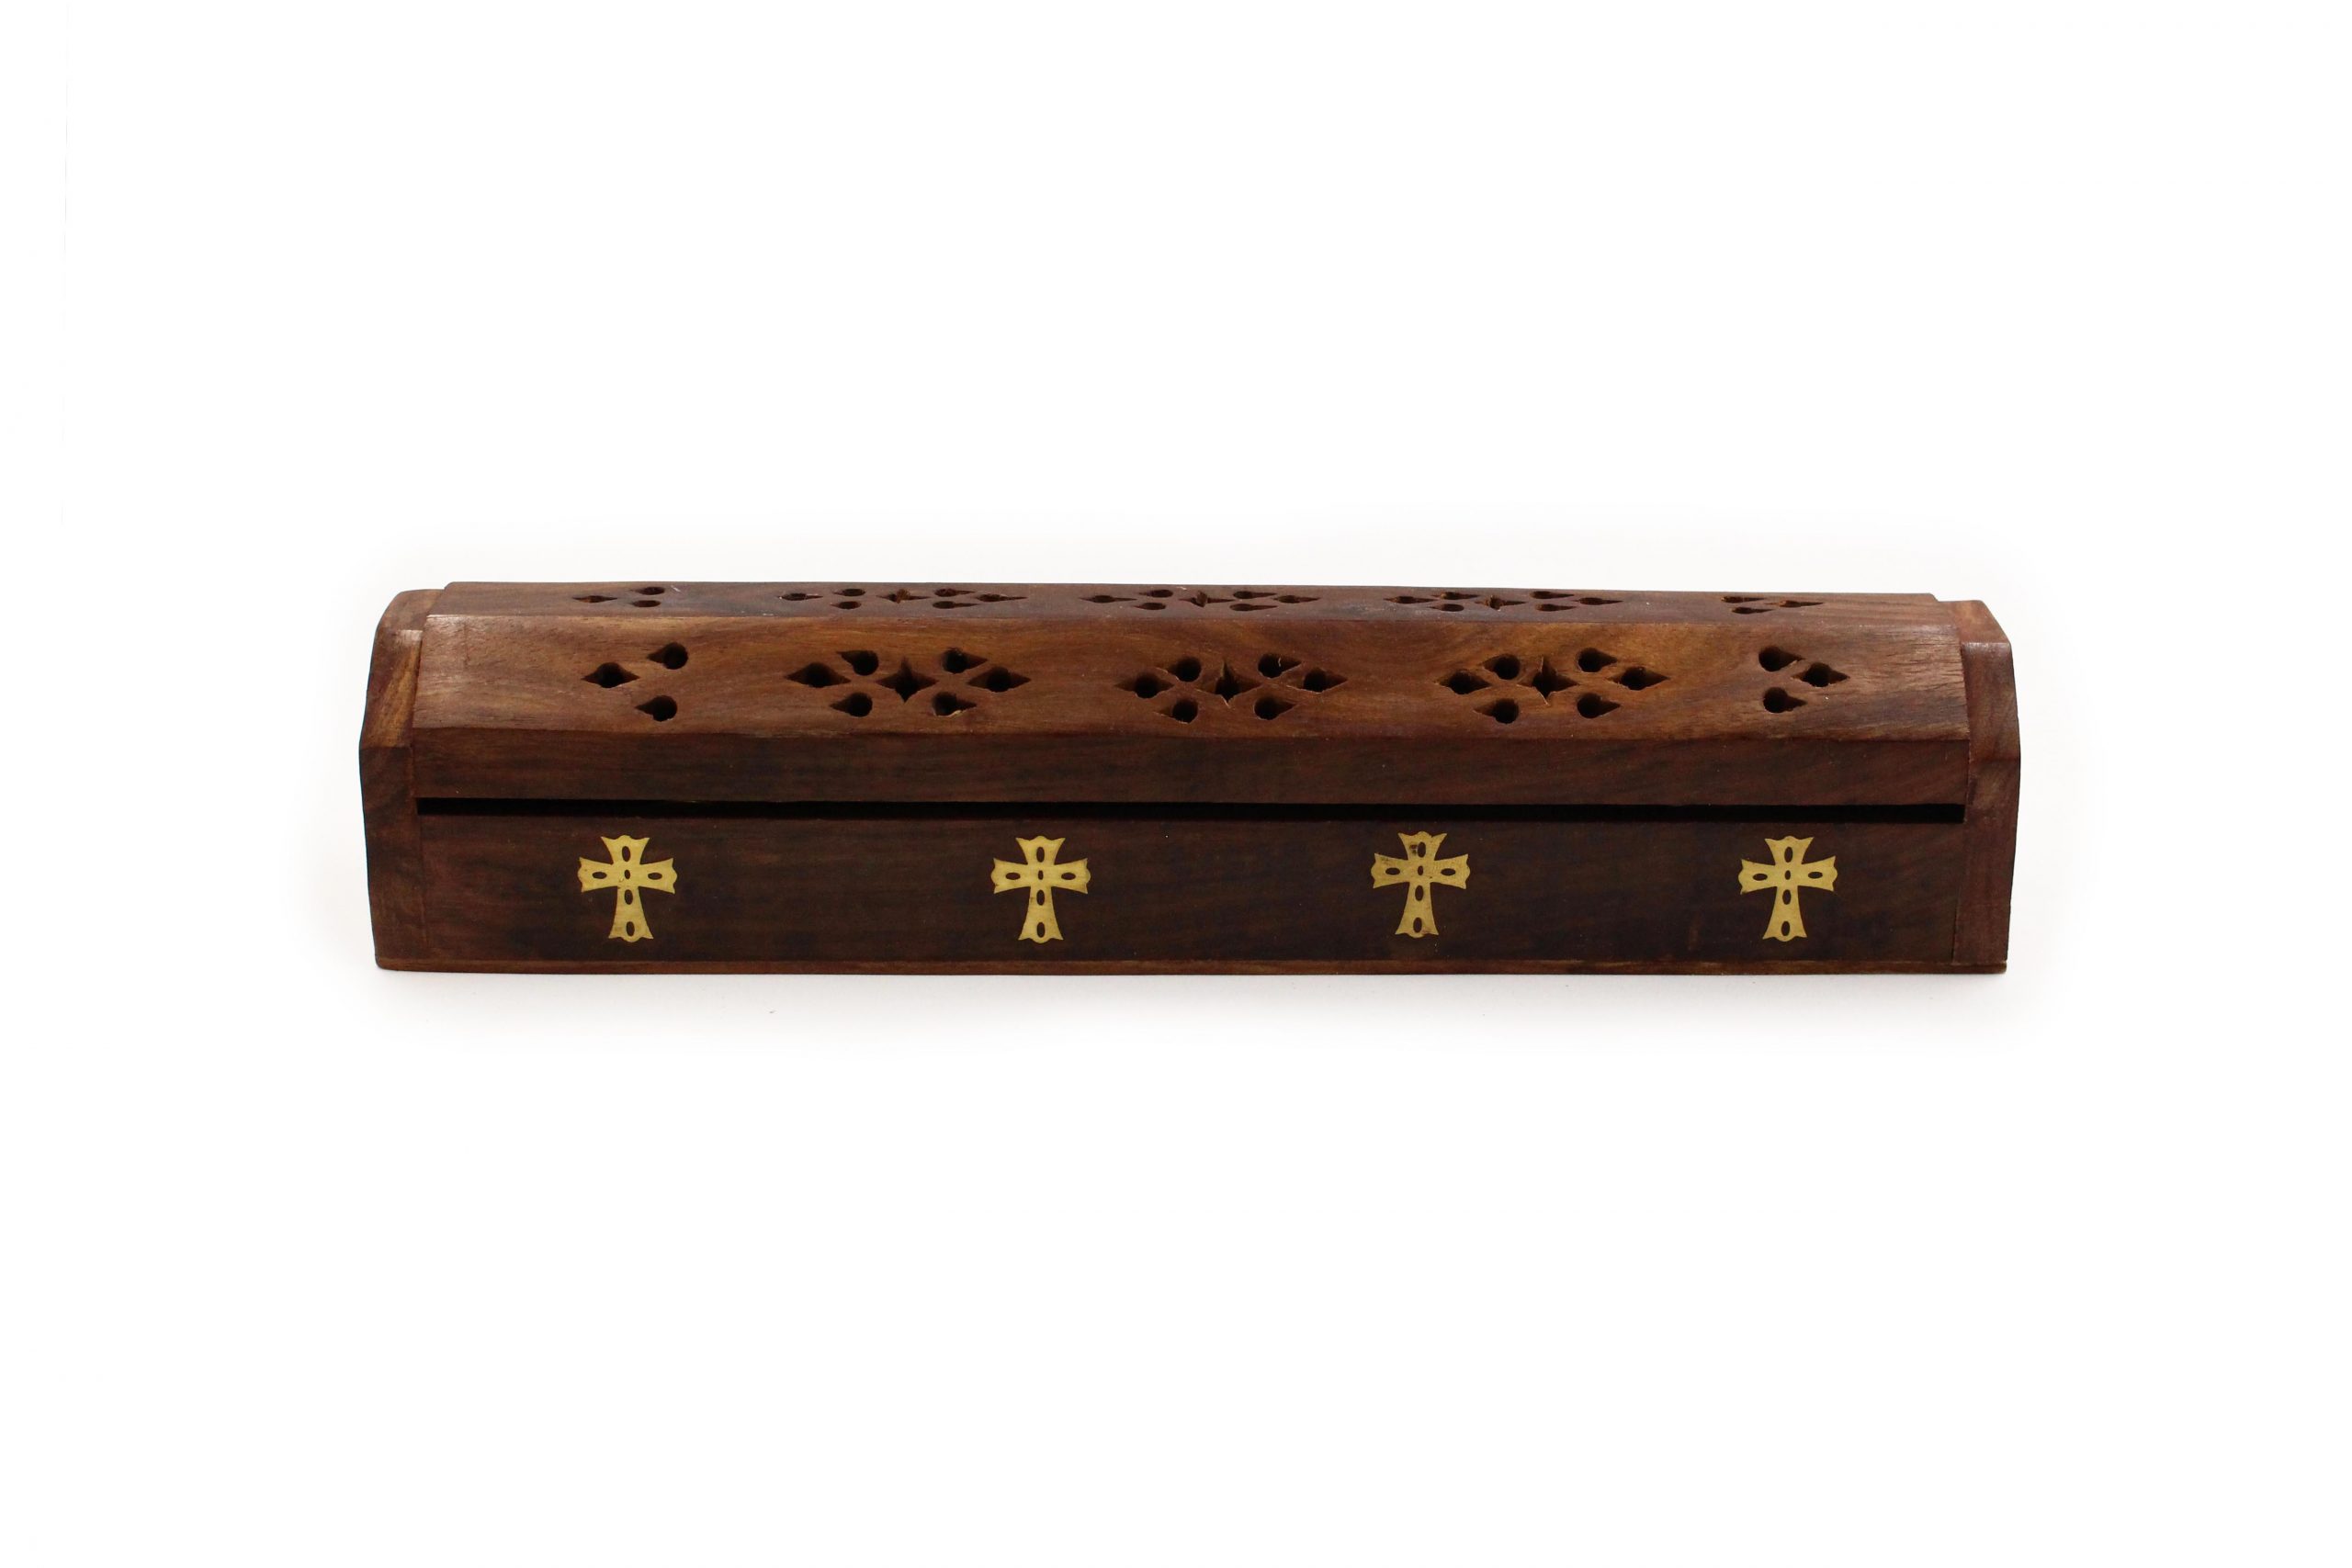 Cross Wood Incense Chest Holder - Crystal Dreams